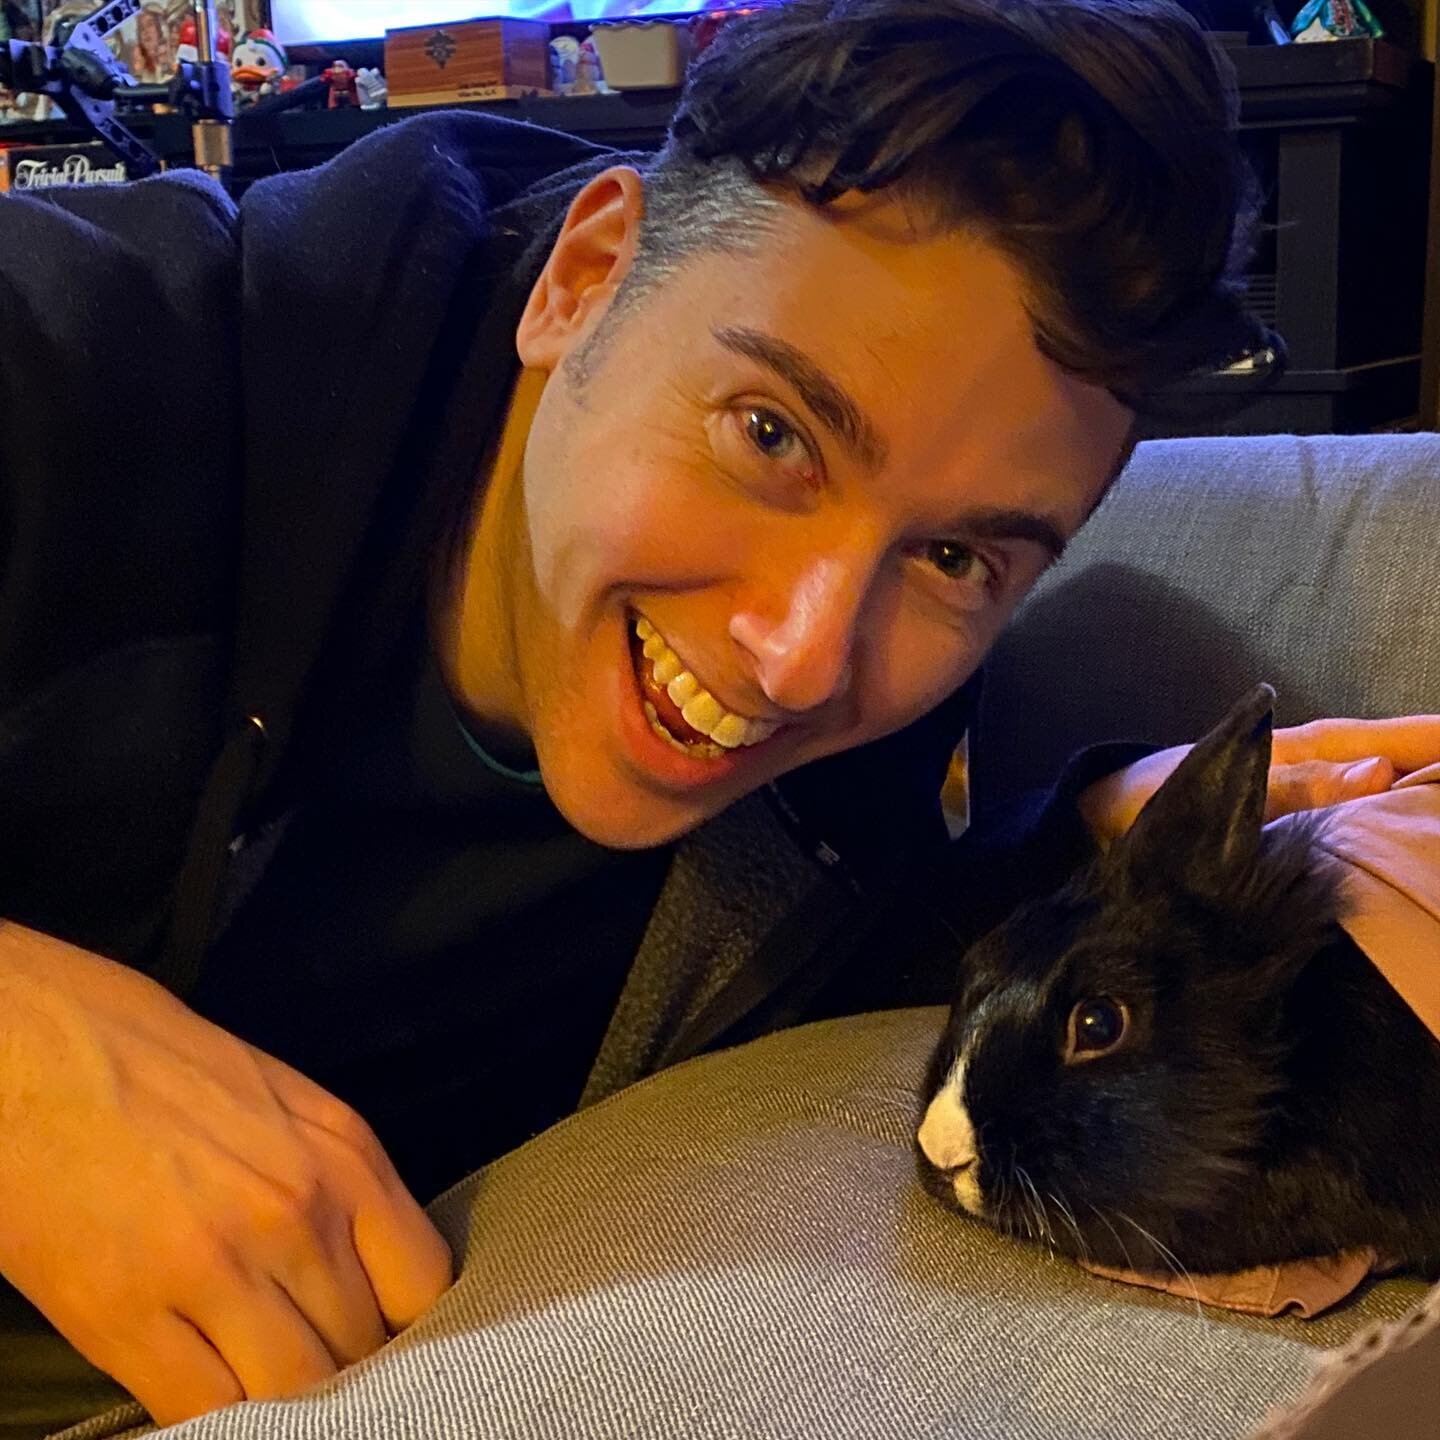 Happy #NationalPetDay and 3 year adoptaversary to the one and only #HarryTBunny! 🐰 🎩
.
#ForeverFriend #FureverFriend #bunny #rabbit #pet #petsofinstagram #pets #adoptdontshop #magician #iHeartTodd #bunniesofinstagram #rabbitsofinstagram #🐇